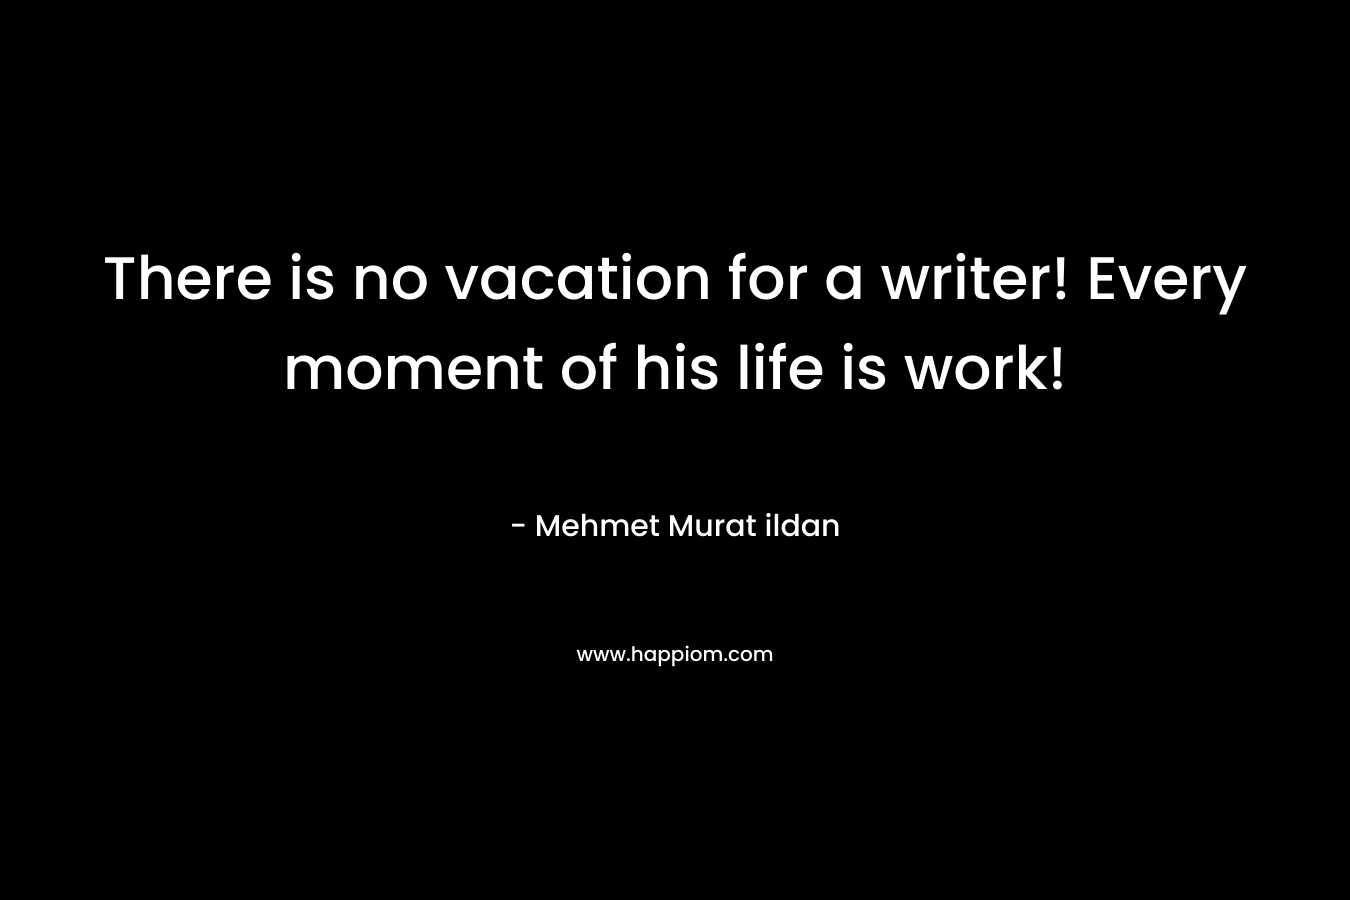 There is no vacation for a writer! Every moment of his life is work! – Mehmet Murat ildan